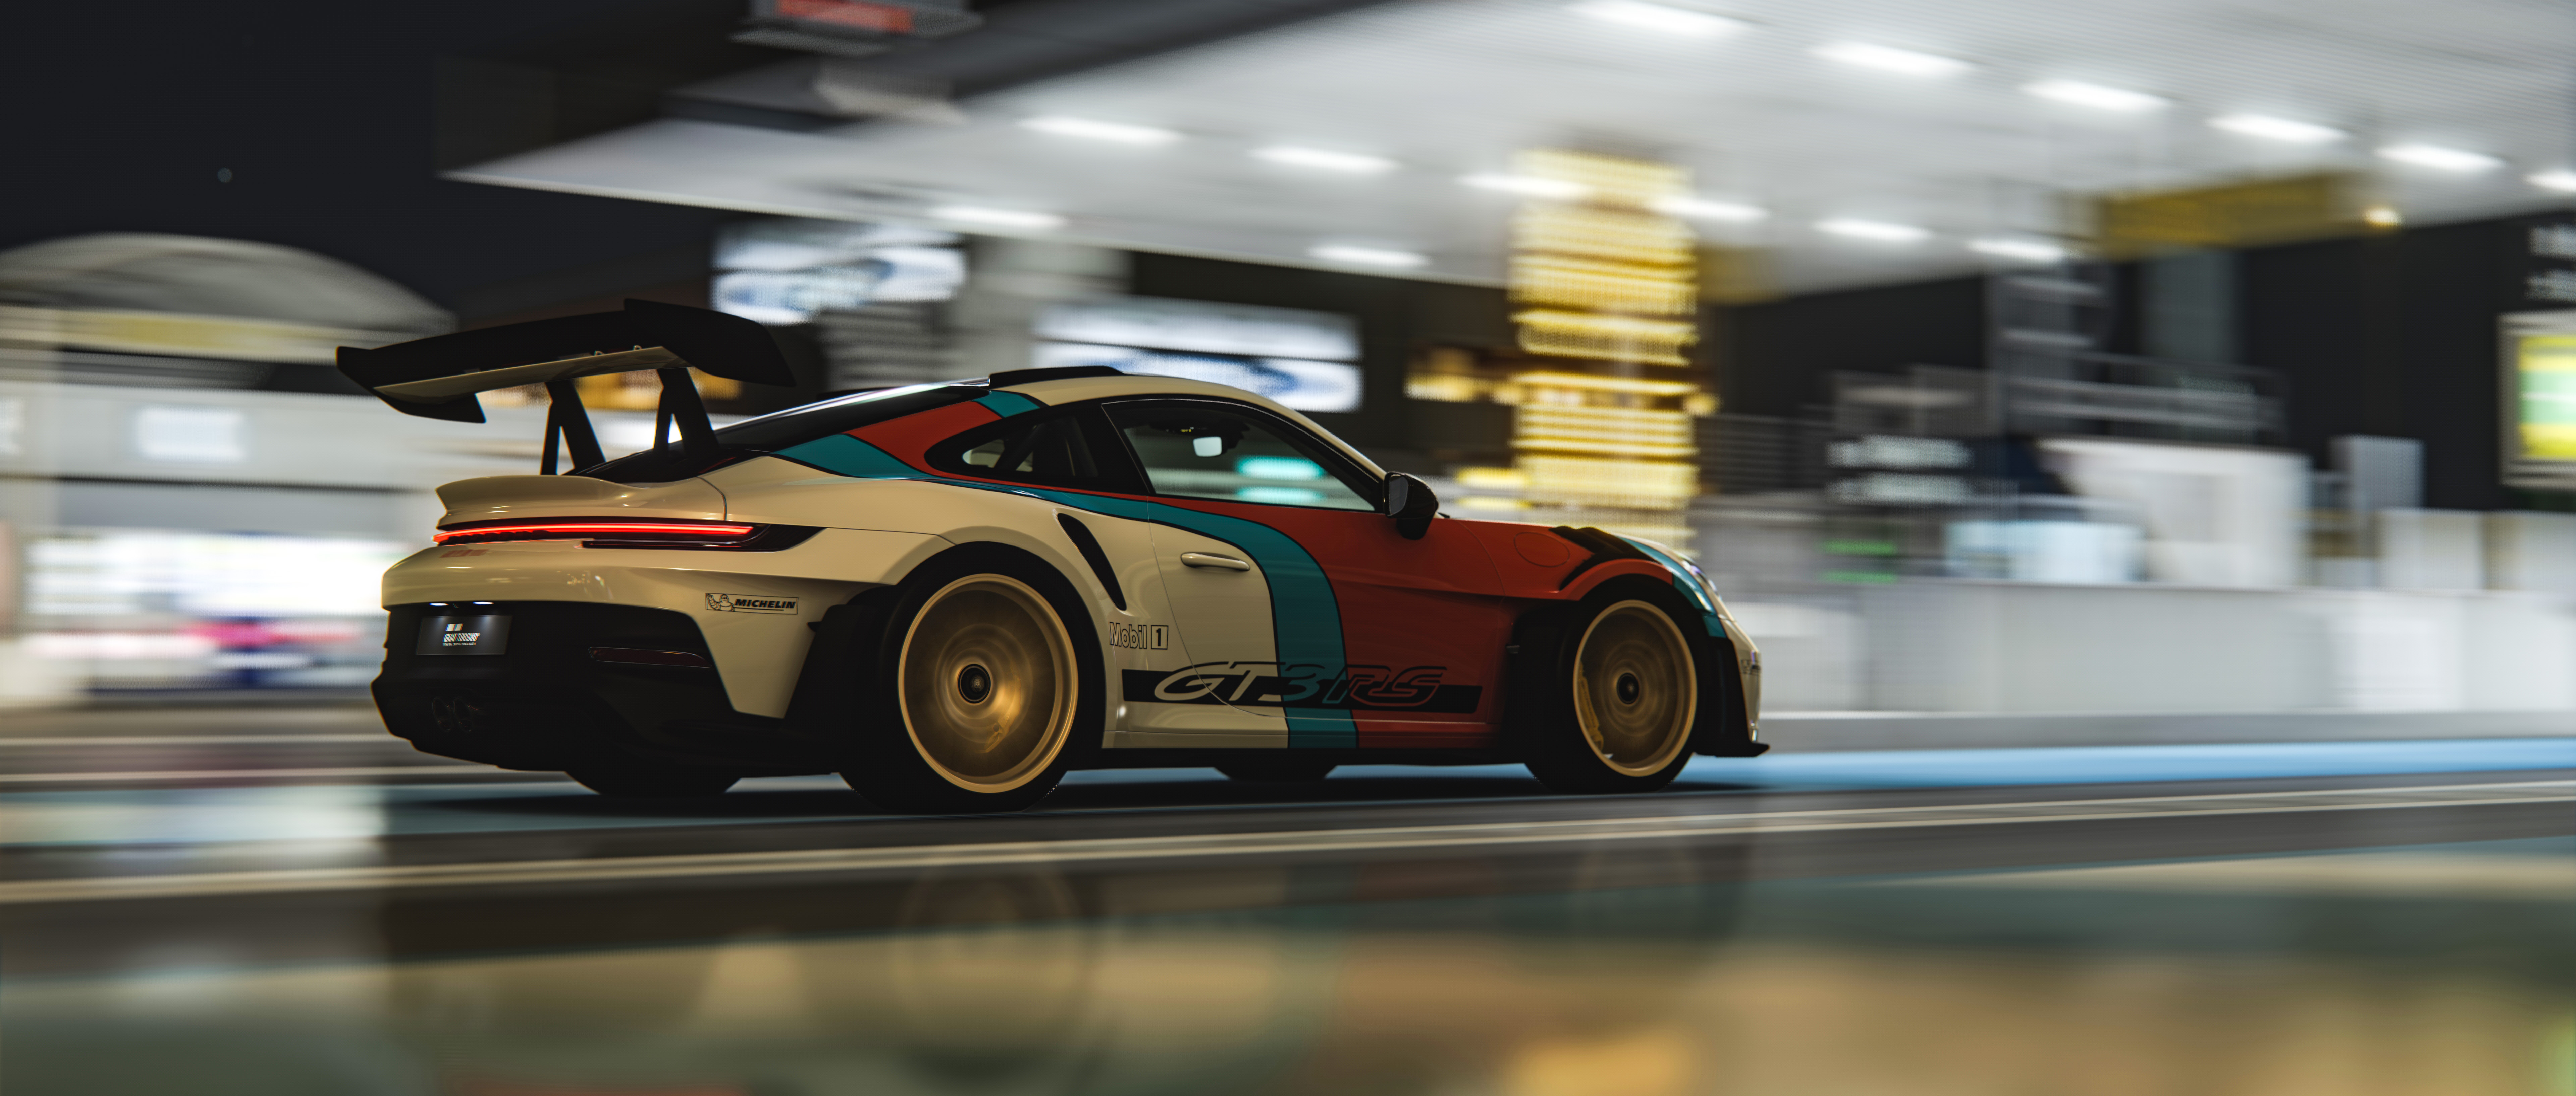 General 7680x3269 Porsche 911 gt3rs car PC gaming Assetto Corsa CGI wheels vehicle reflection digital art video game art screen shot video games taillights side view ceiling lights motion blur blurred